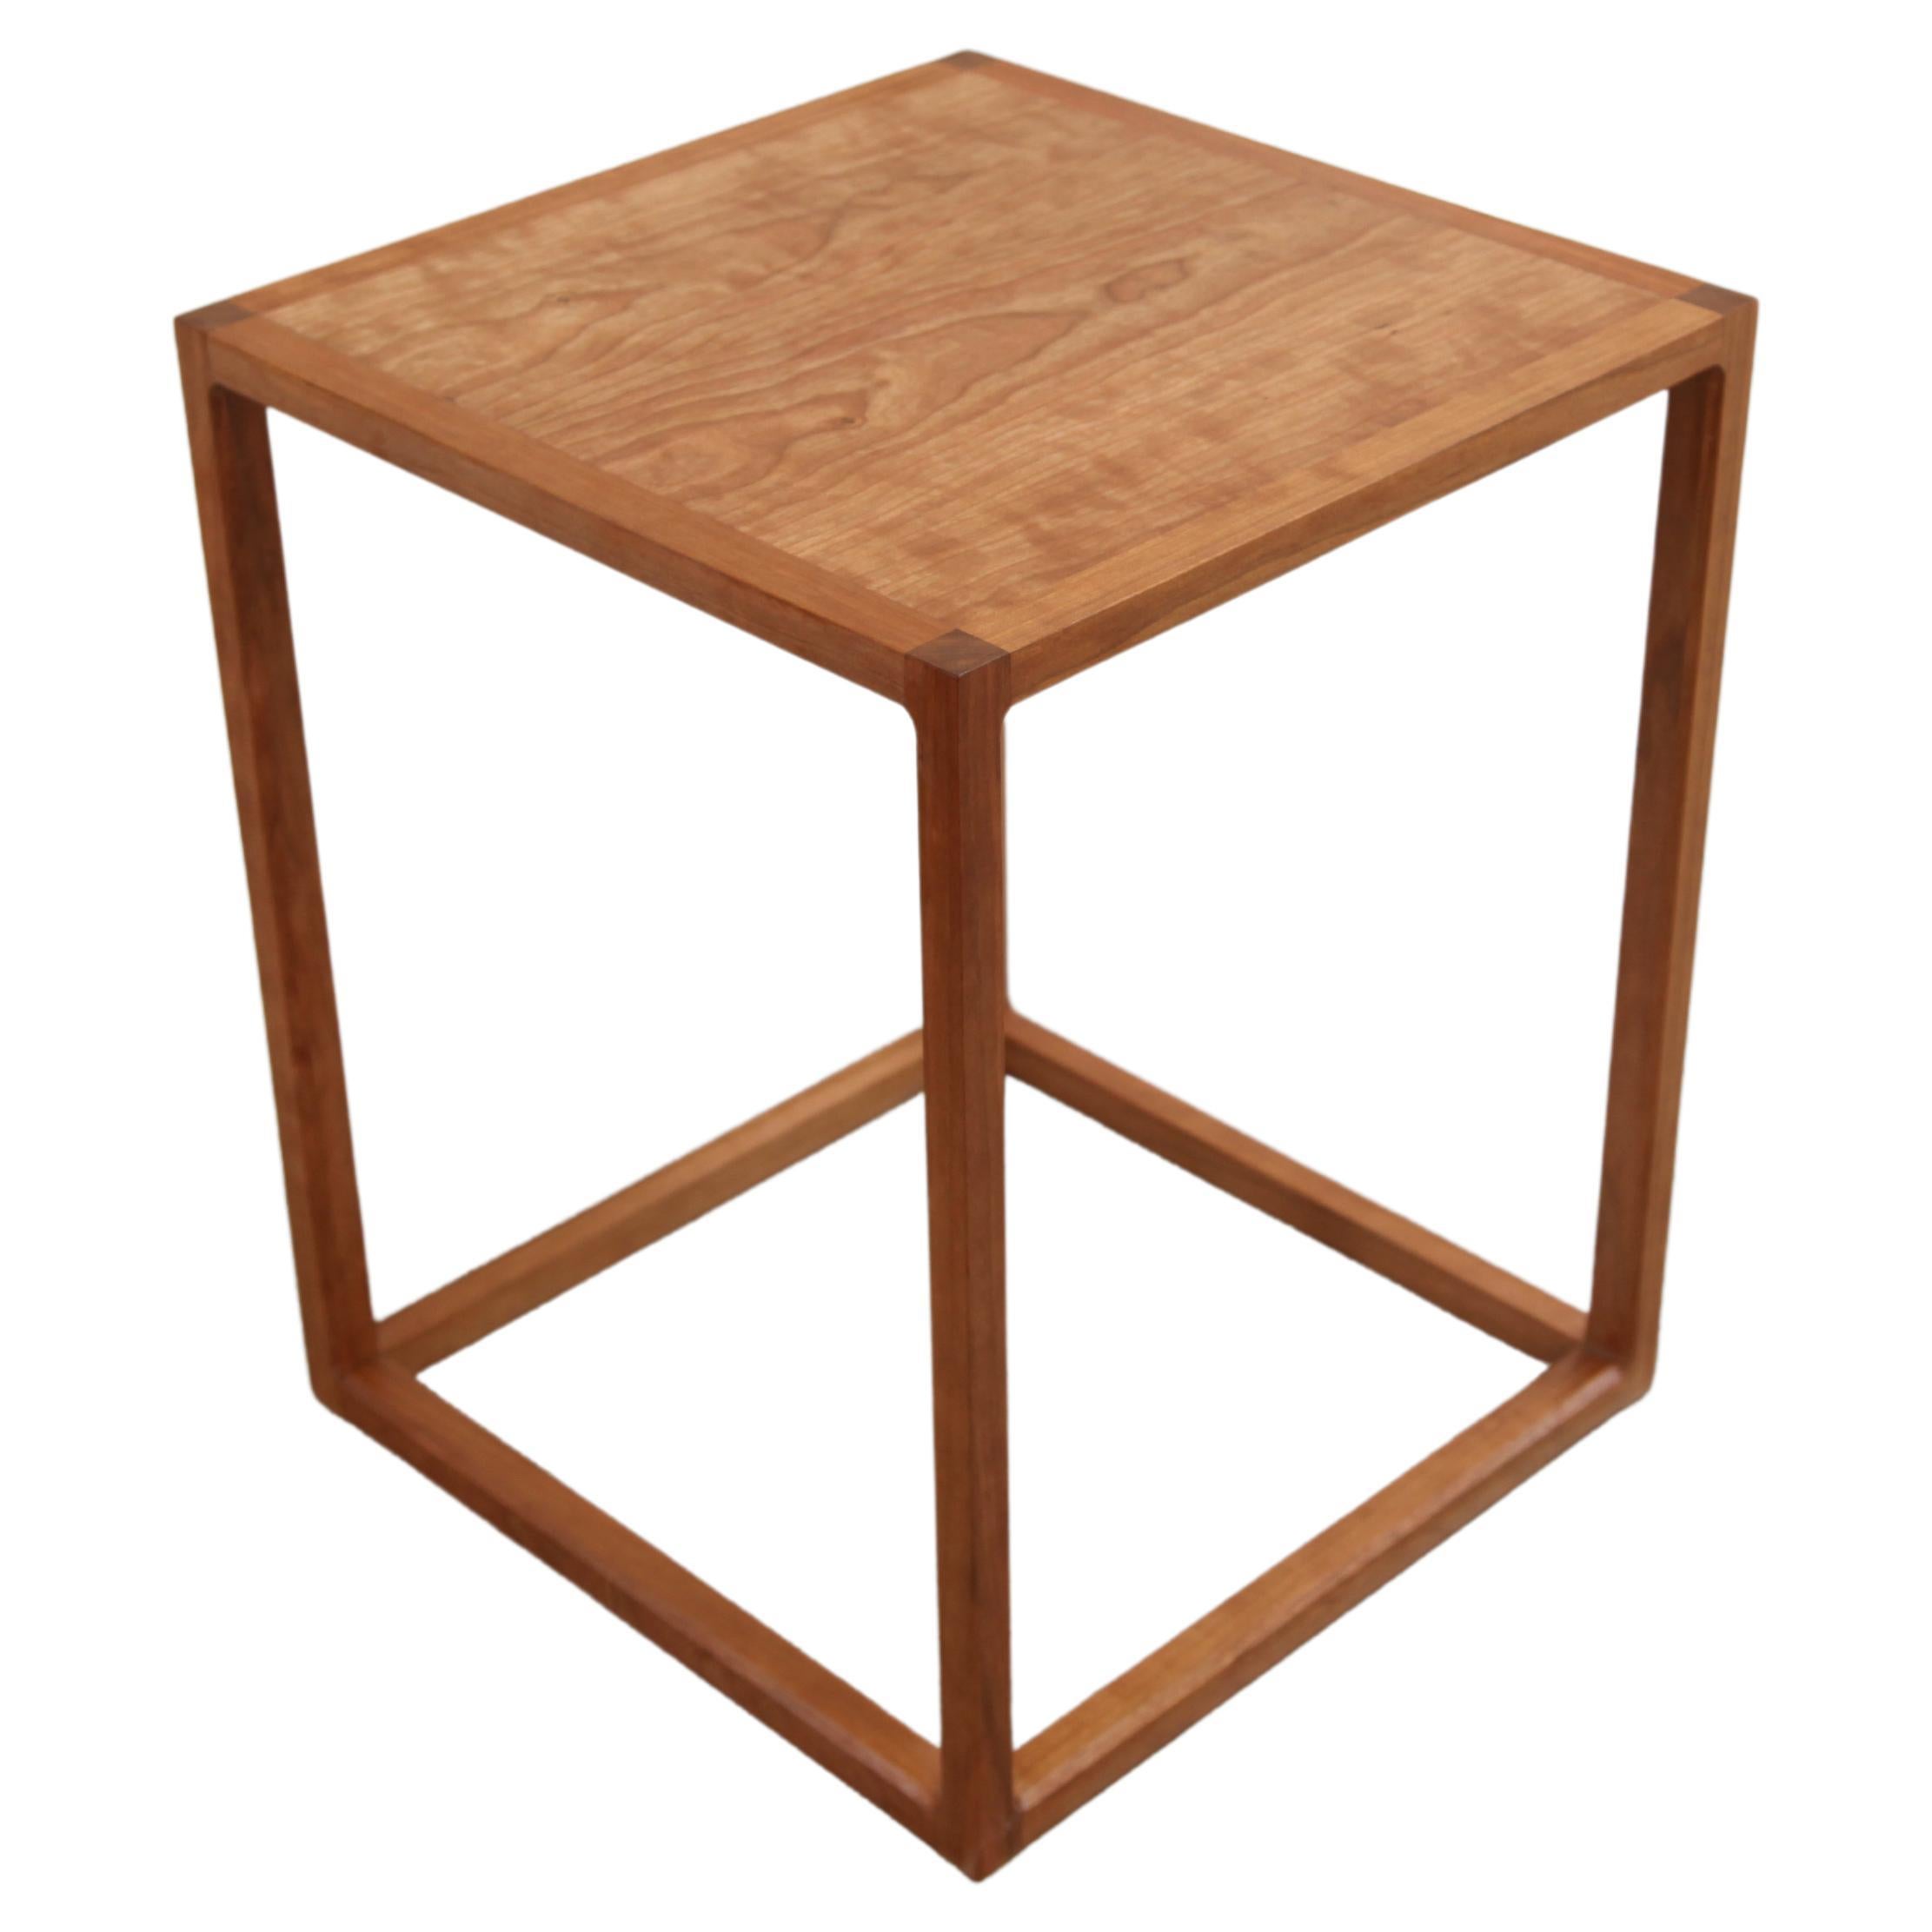 This Donald Judd Inspired side table in cherry was designed for a client who wanted a clean shape and didn't need a drawer by their bed. It references Donald Judd’s clean geometric shapes but also incorporates some softness in the interior edge